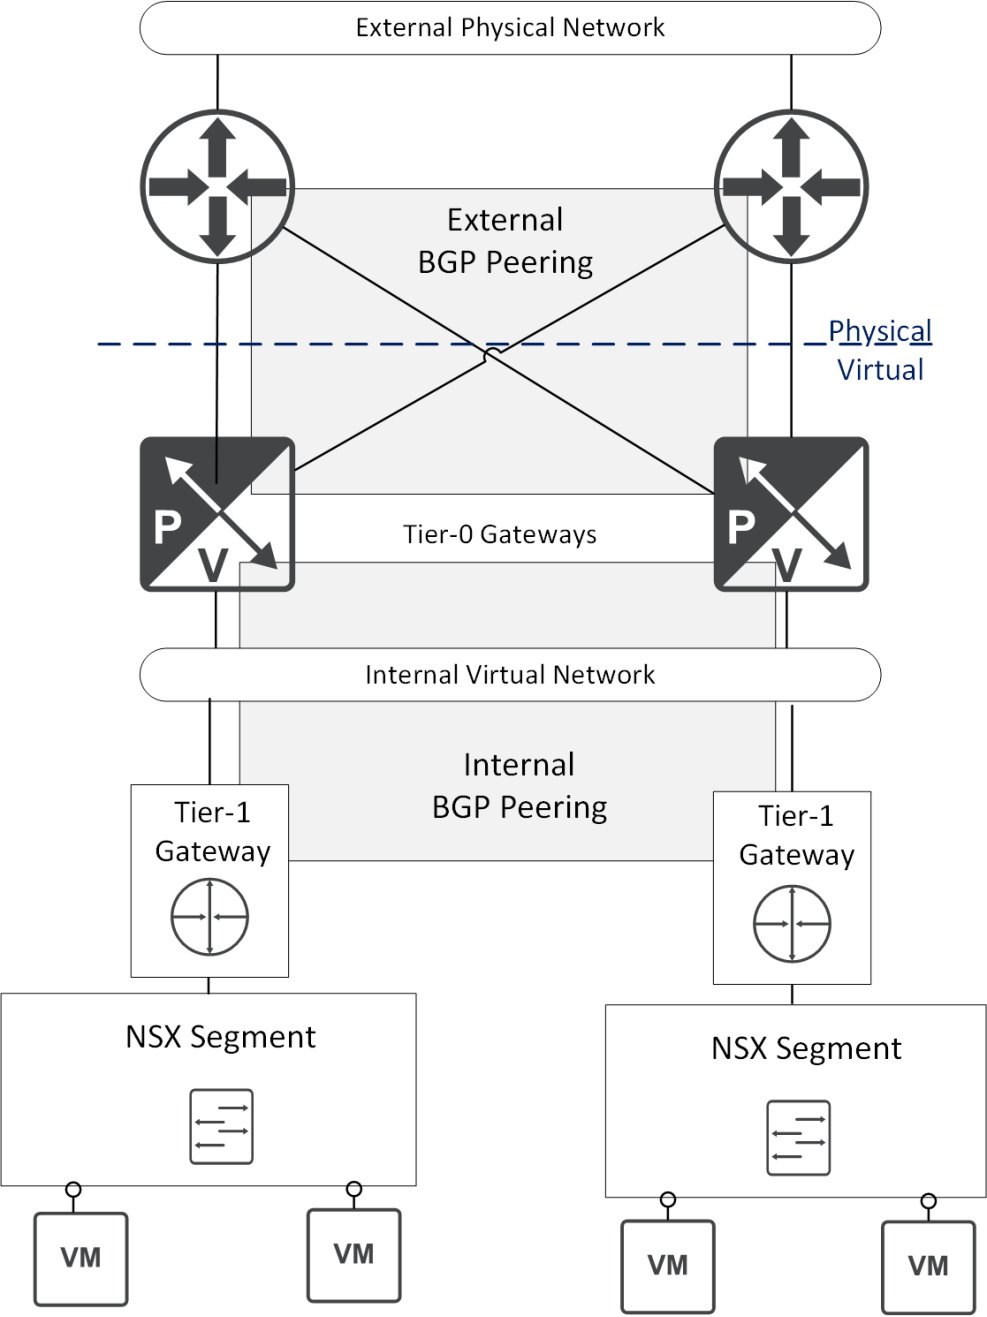 This figure shows the relationship between the gateways in NSX.